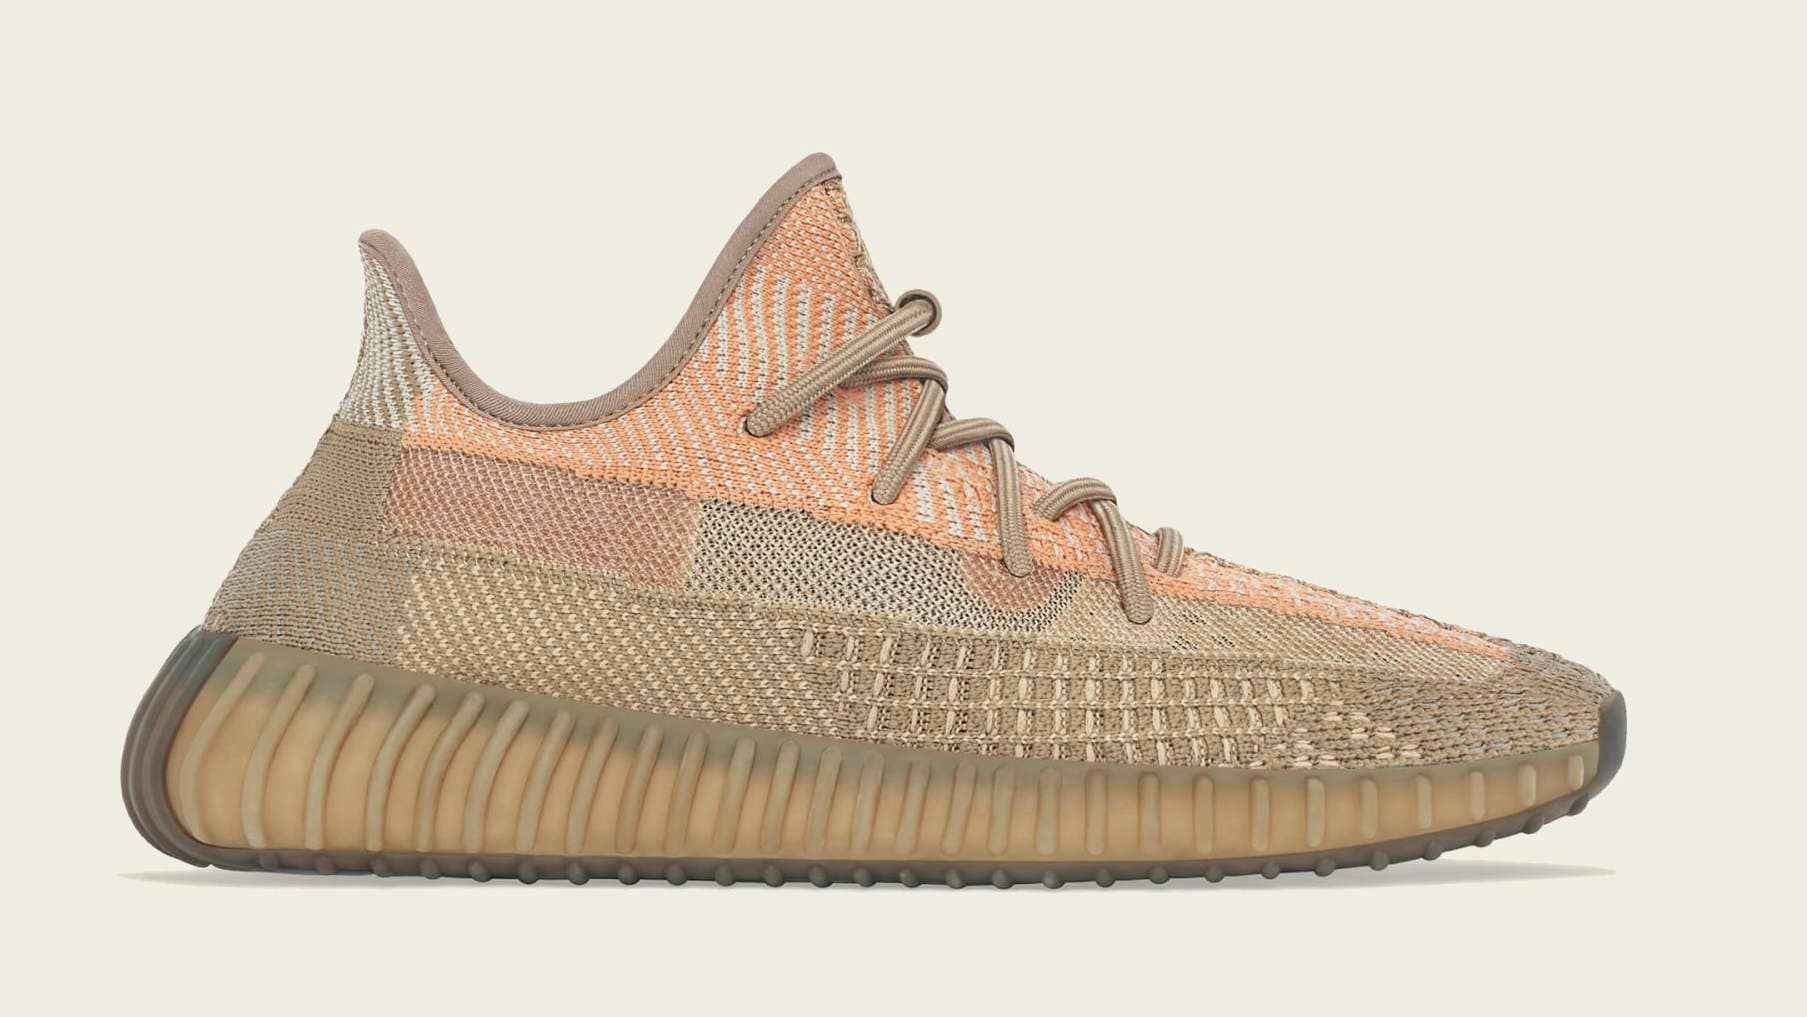 Adidas Yeezy Boost 350 V2 'Sand Taupe' FZ5240 Lateral